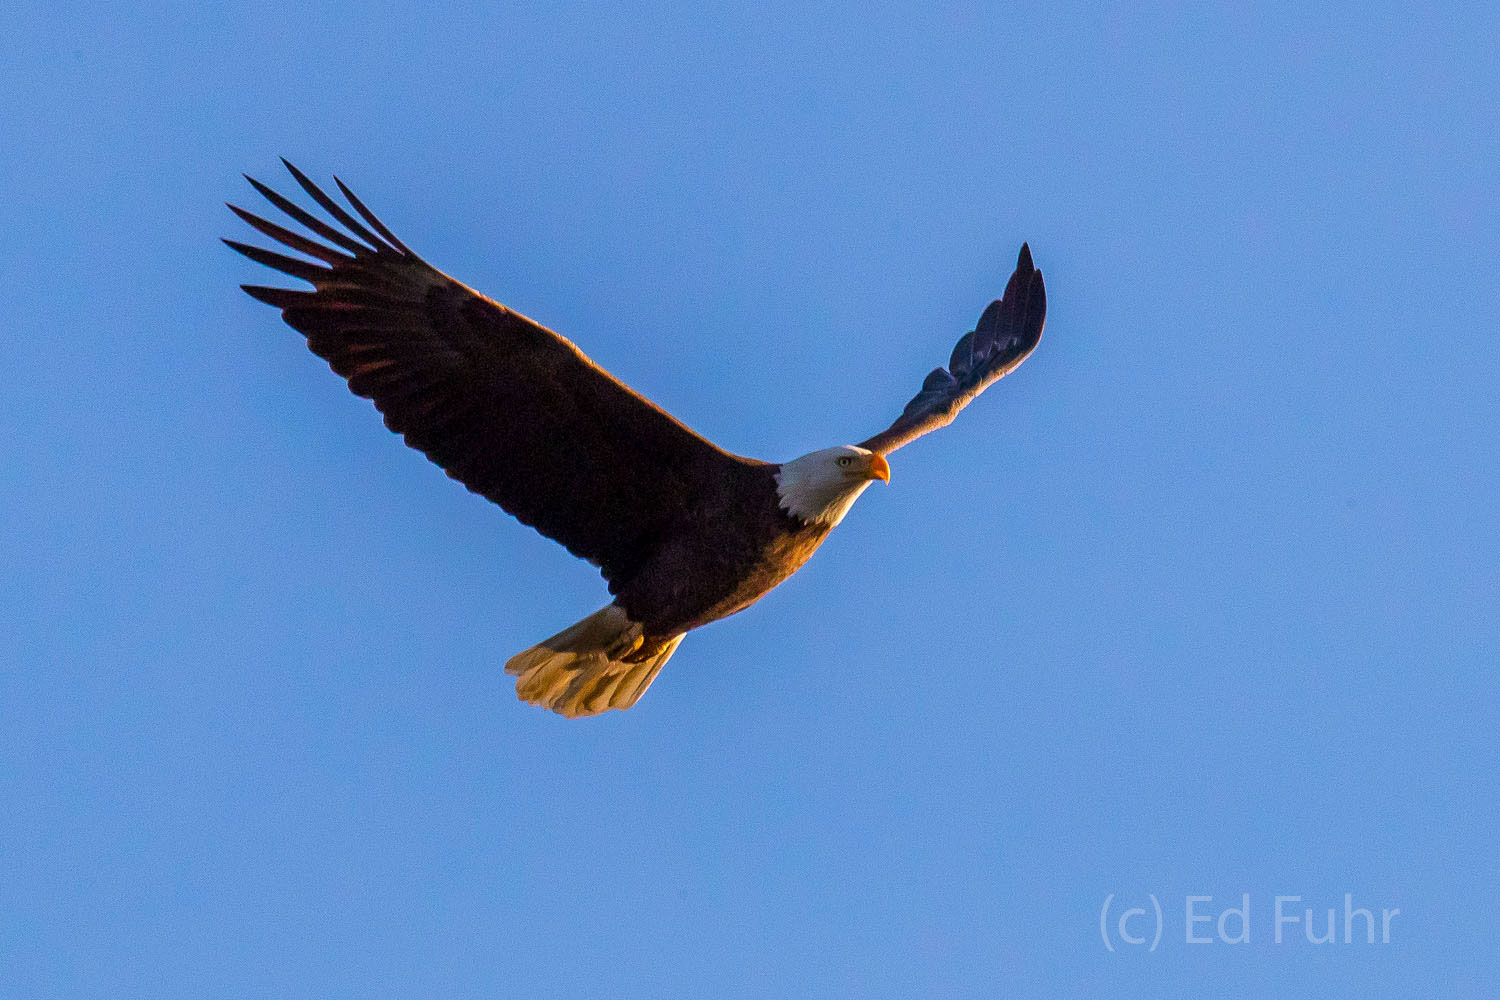 The warm early light of morning strikes a bald eagle as it circles higher.